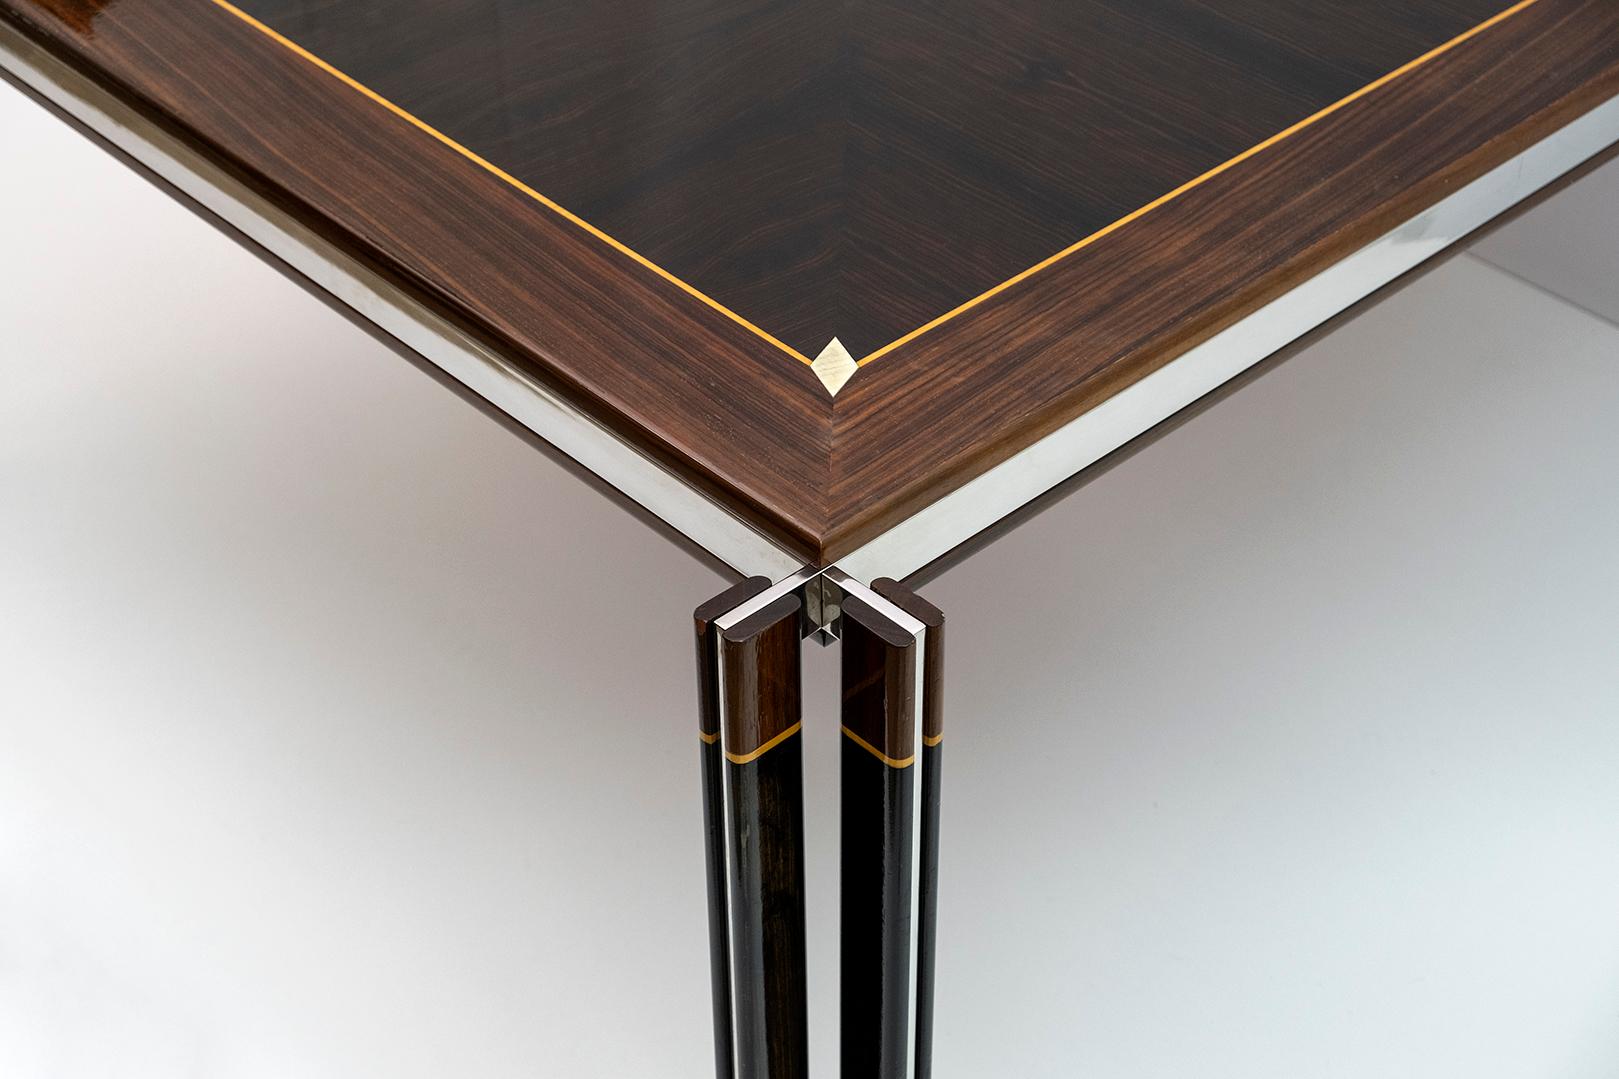 Paolo Barracchia Italian Steel and Inlaid Wood Dinning Table by Roman Deco, 1978 For Sale 8